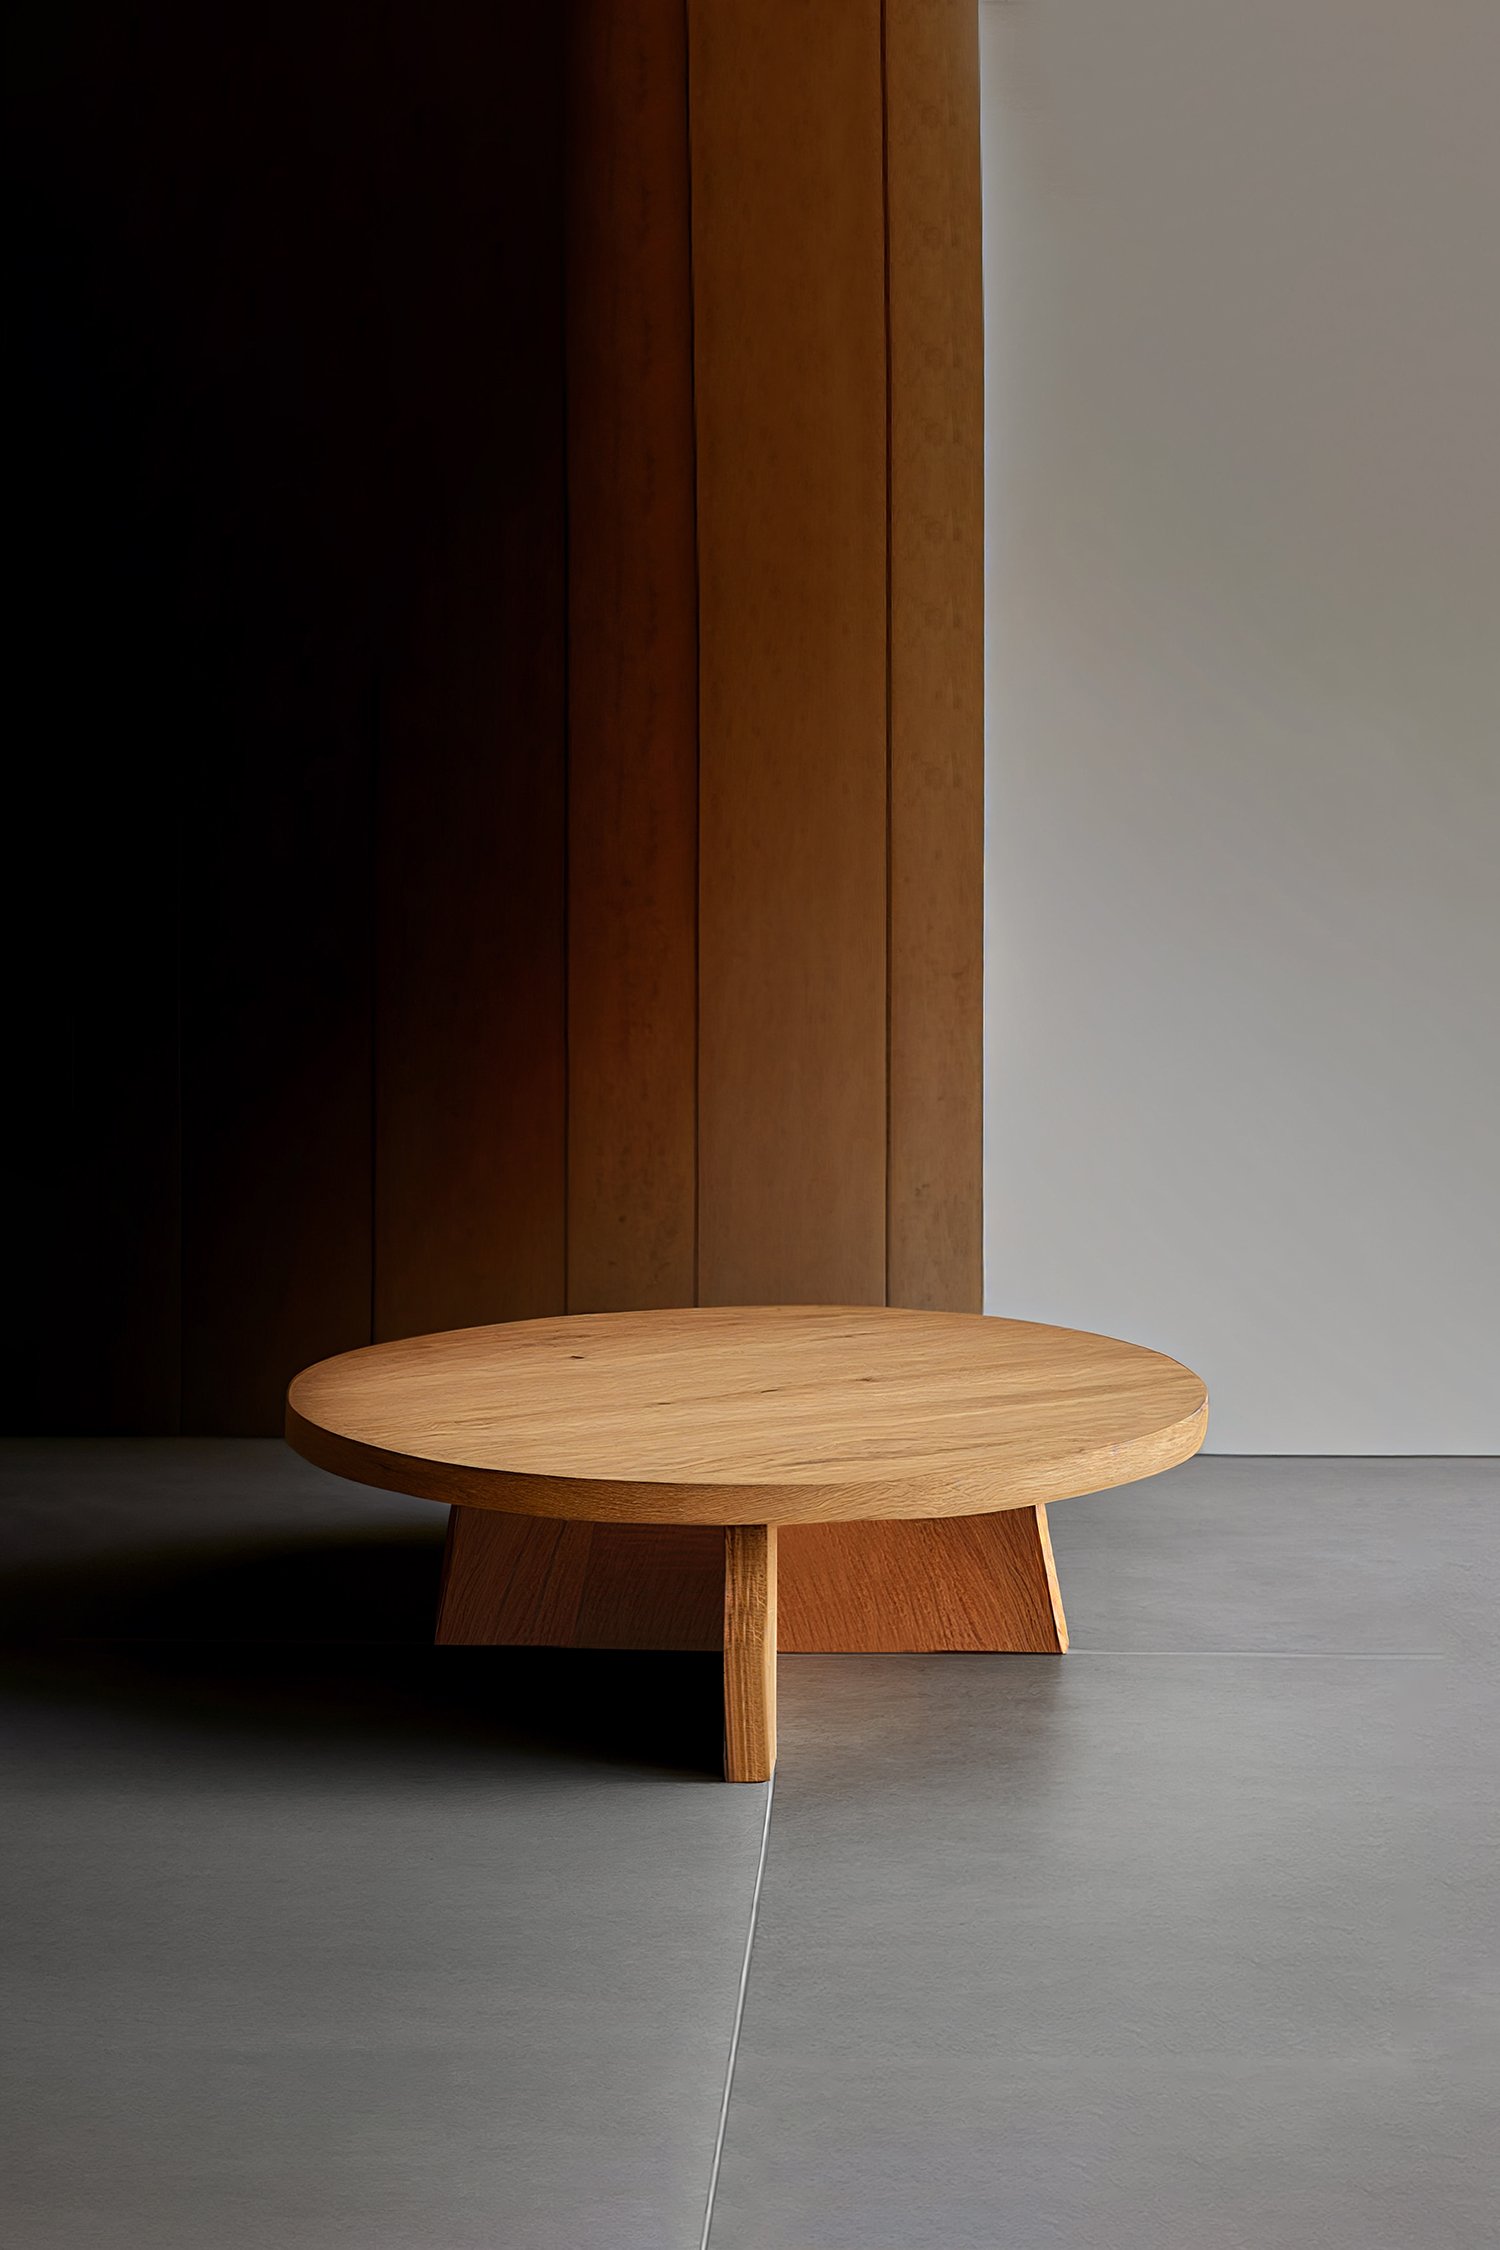 Cruciform Pyramid Base Solid Wood Round Table By NONO 2.jpg